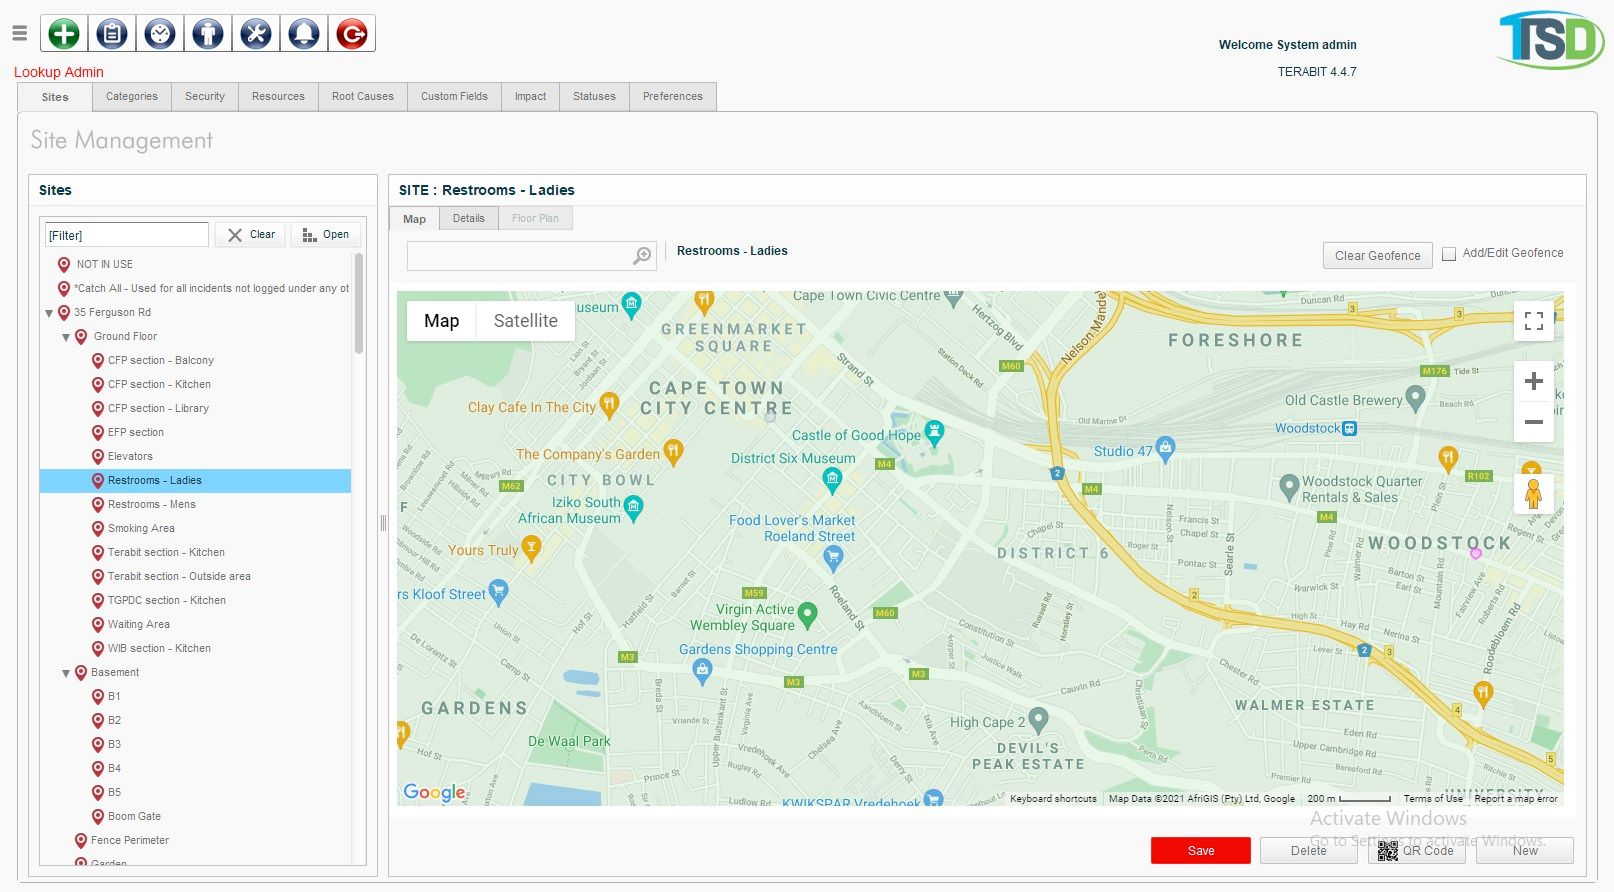 Site Management - mange sites and related geofences and metadata